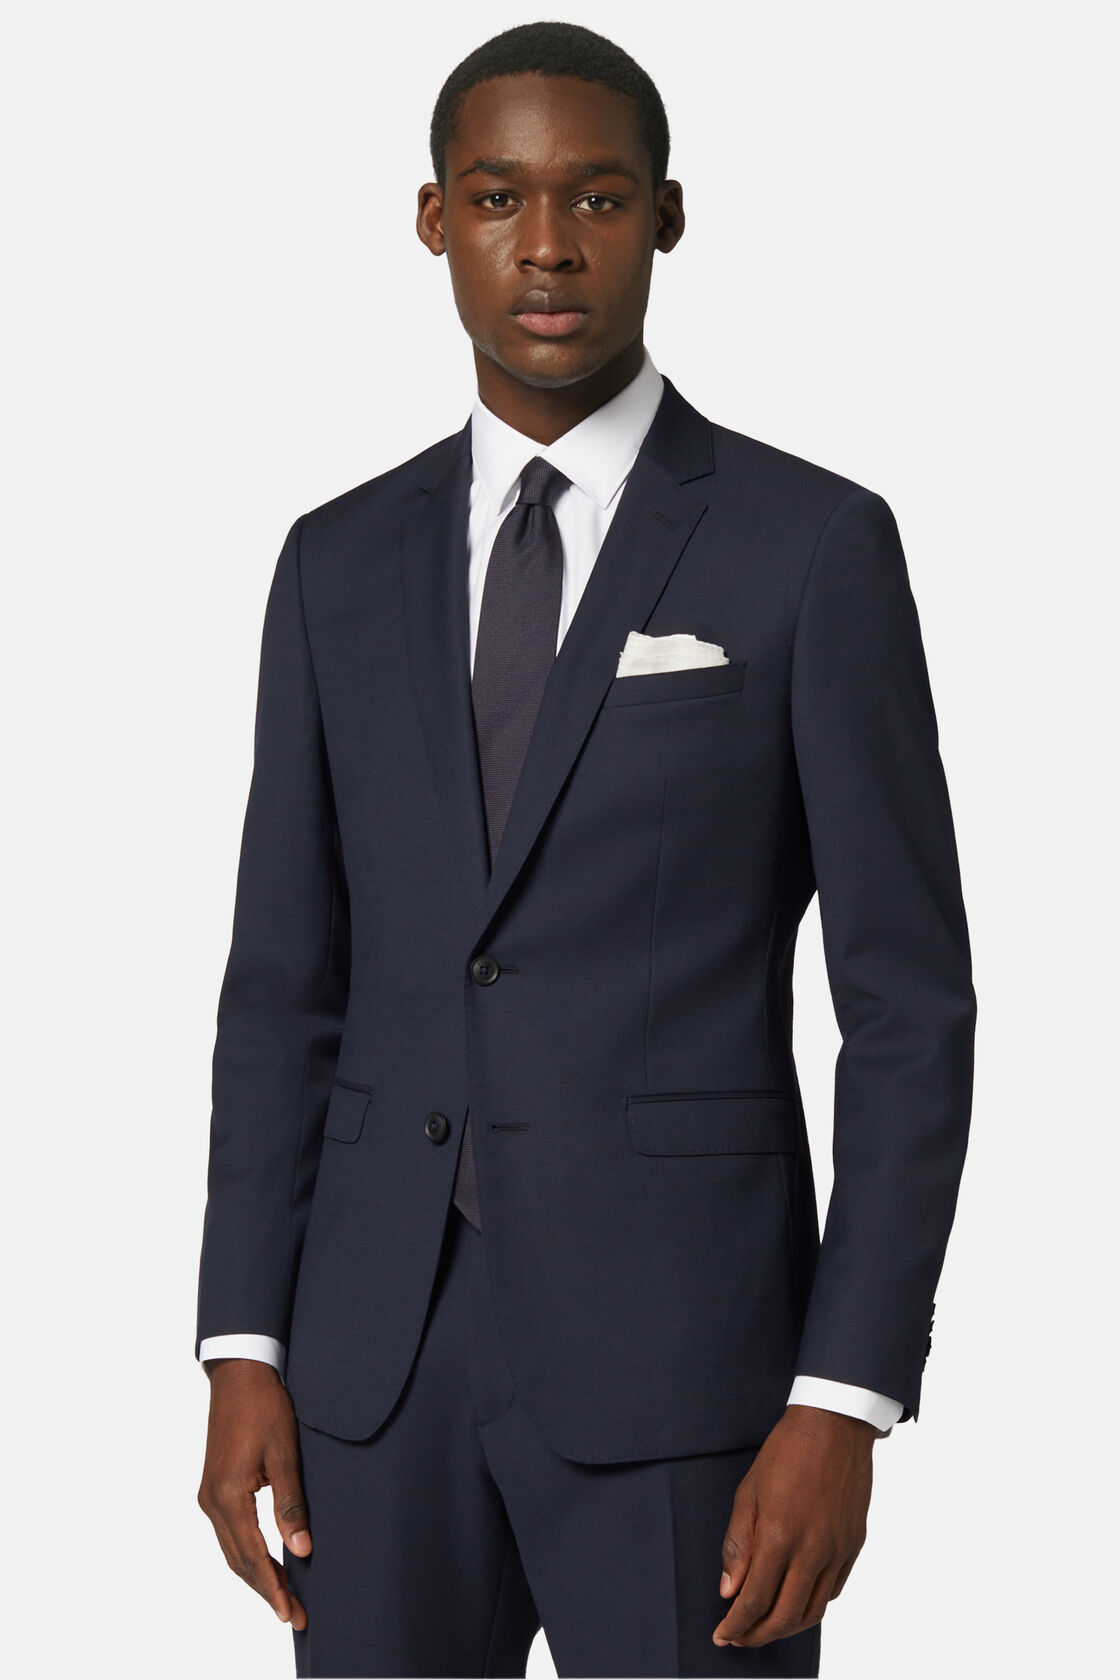 Micro patterned stretch wool jacket, Navy blue, hi-res